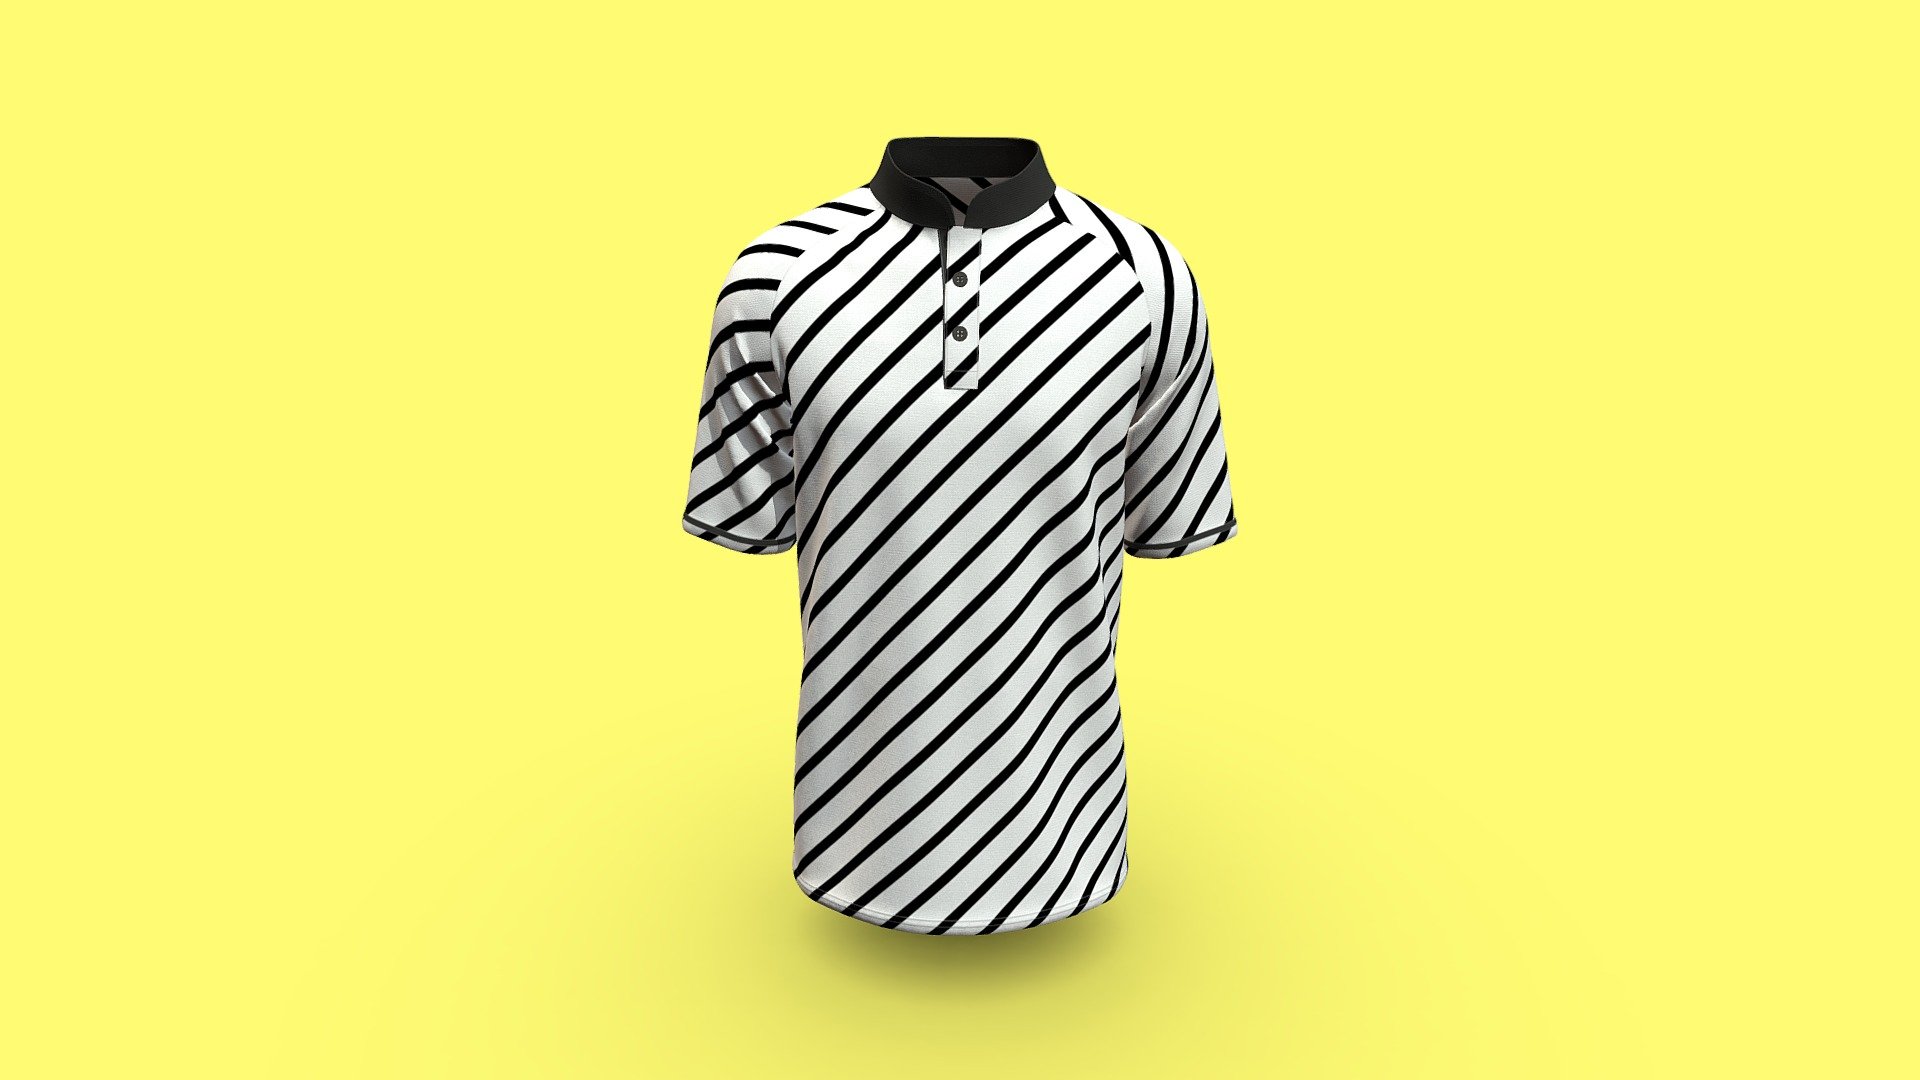 Cloth Title = New Polo Design 

SKU = DG100203 

Category = Men 

Product Type = Polo 

Cloth Length = Regular 

Body Fit = Regular Fit 

Occasion = Casual 

Sleeve Style = Raglan Sleeve 


Our Services:

3D Apparel Design.

OBJ,FBX,GLTF Making with High/Low Poly.

Fabric Digitalization.

Mockup making.

3D Teck Pack.

Pattern Making.

2D Illustration.

Cloth Animation and 360 Spin Video.


Contact us:- 

Email: info@digitalfashionwear.com 

Website: https://digitalfashionwear.com 


We designed all the types of cloth specially focused on product visualization, e-commerce, fitting, and production. 

We will design: 

T-shirts 

Polo shirts 

Hoodies 

Sweatshirt 

Jackets 

Shirts 

TankTops 

Trousers 

Bras 

Underwear 

Blazer 

Aprons 

Leggings 

and All Fashion items. 





Our goal is to make sure what we provide you, meets your demand 3d model